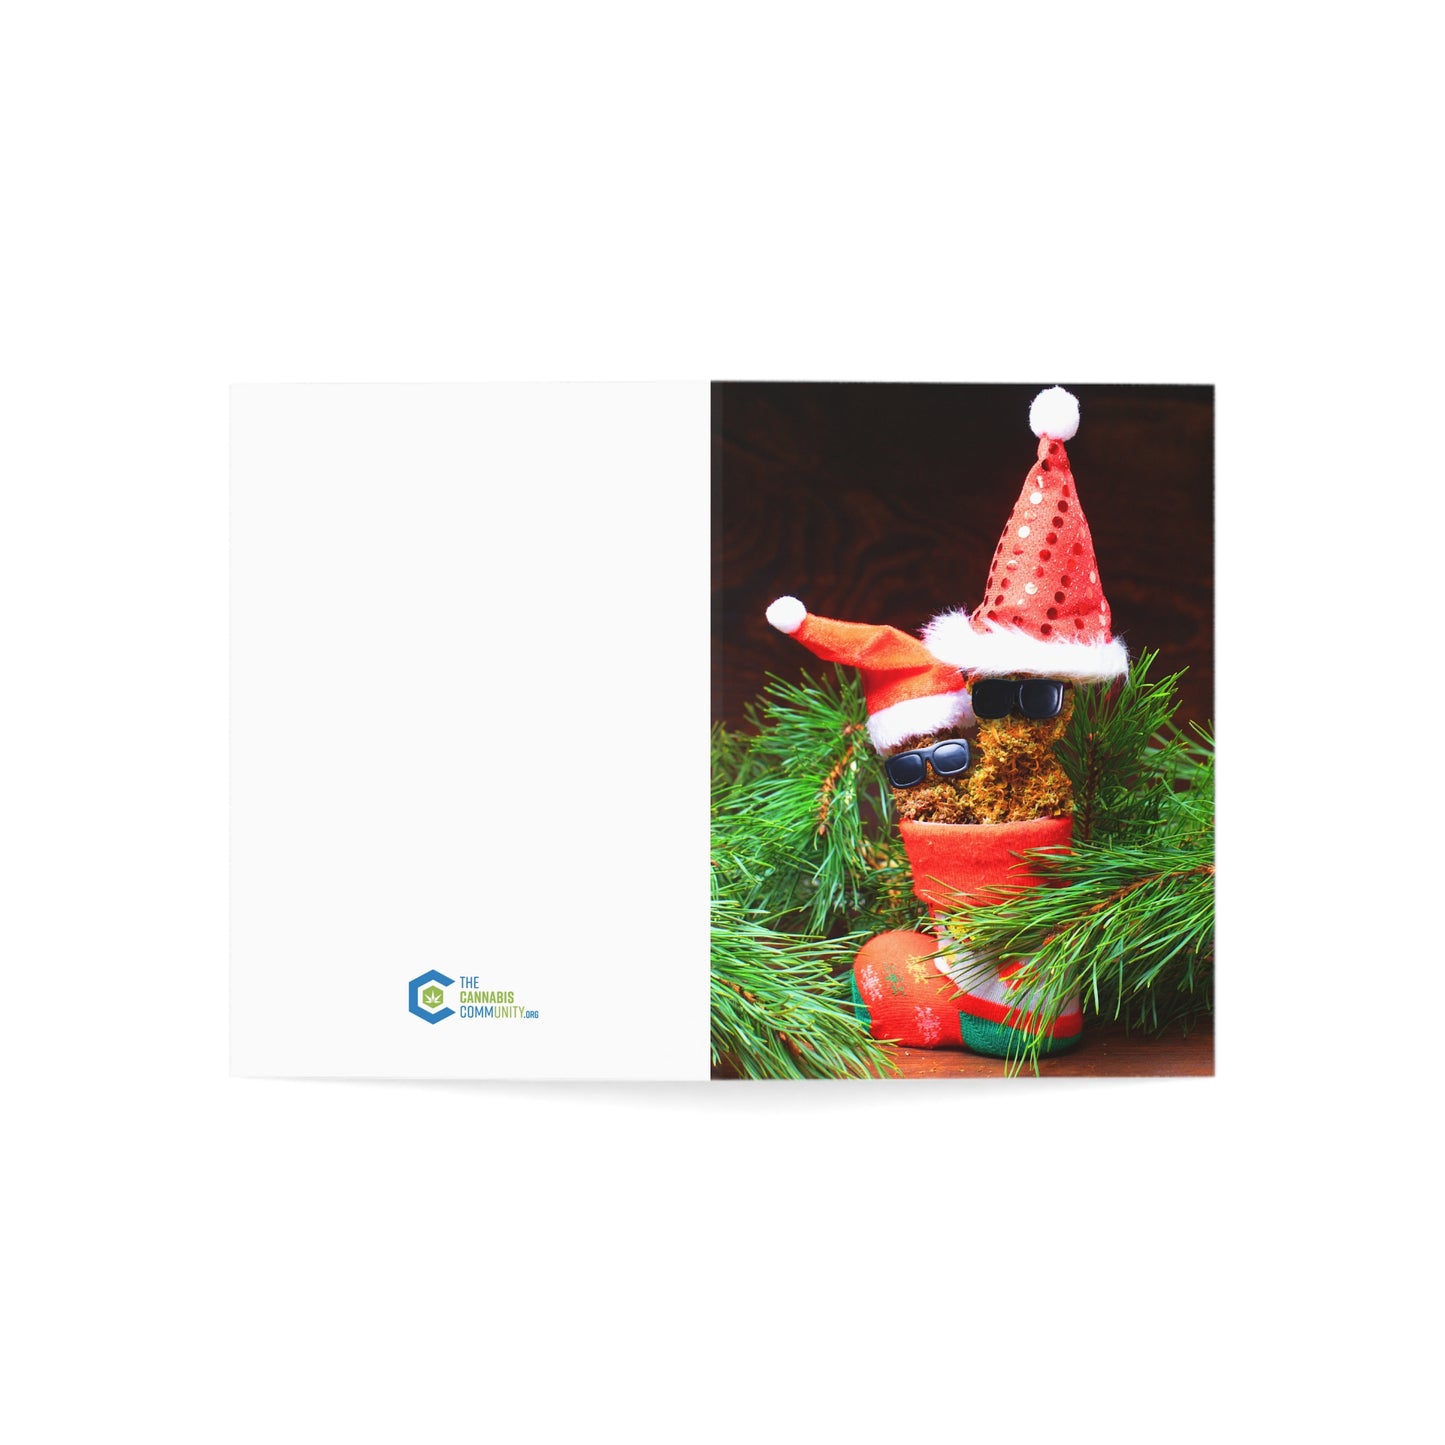 Openview of greeting card to see front and back at once